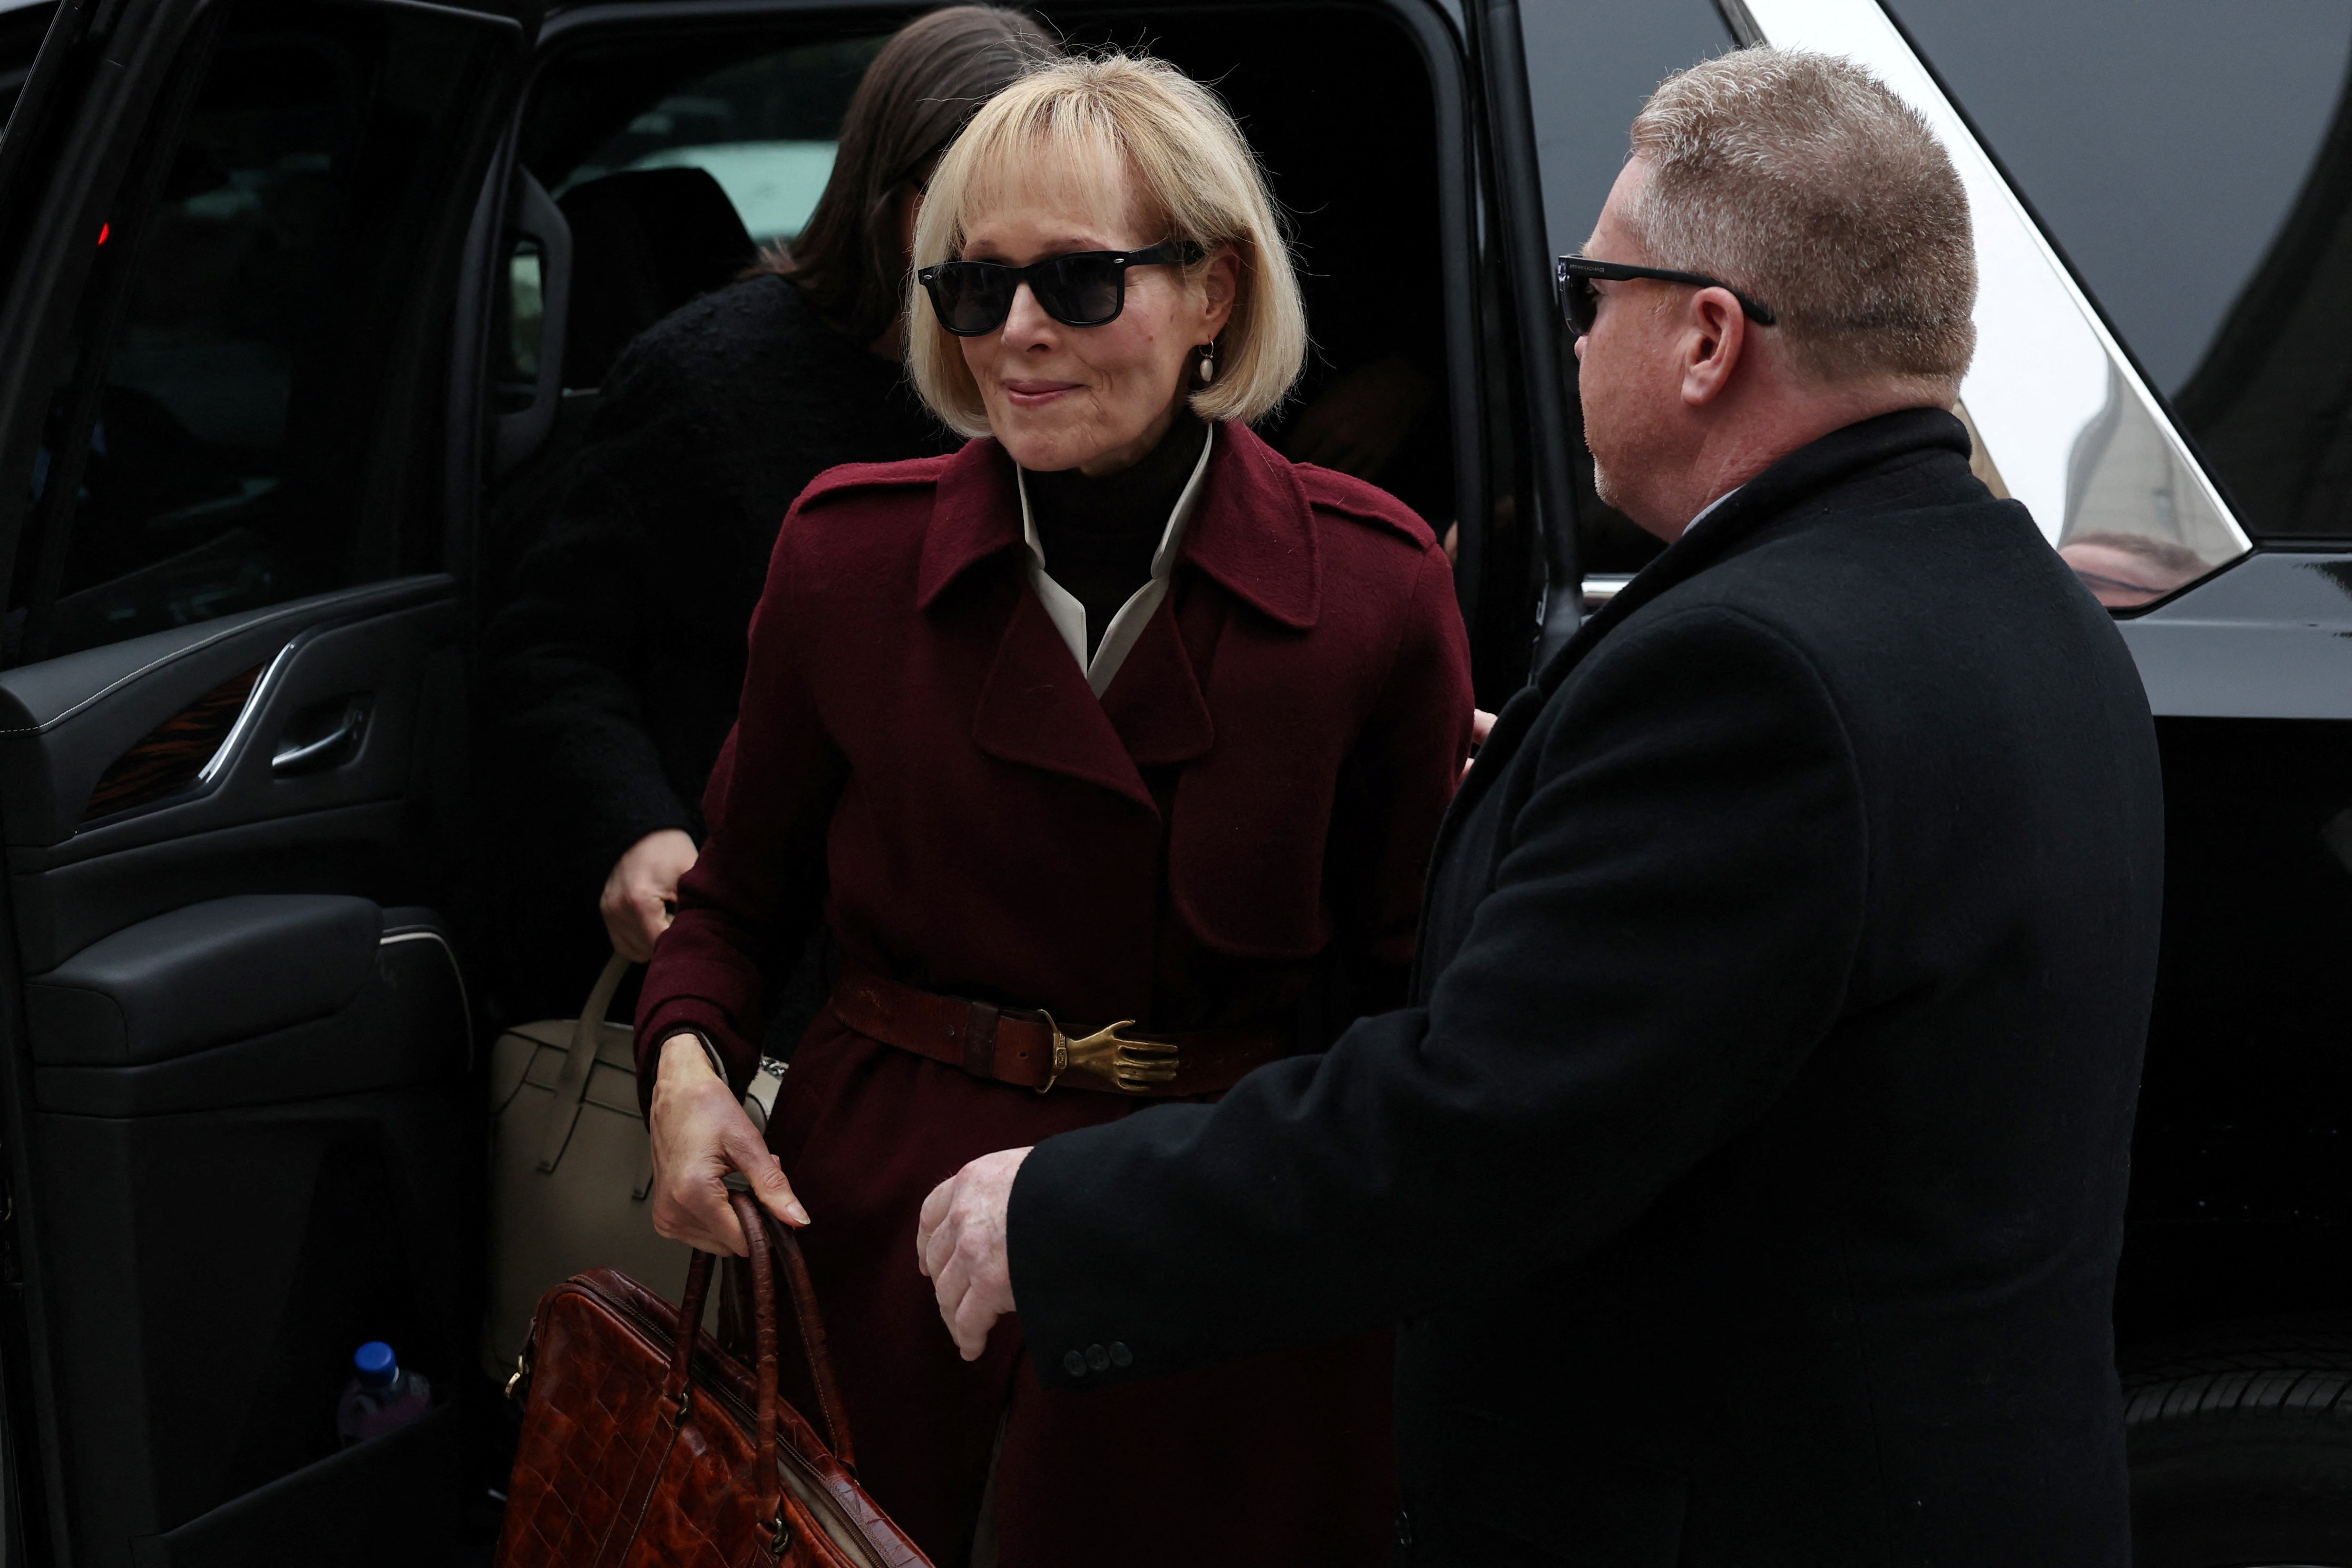 E. Jean Carroll enters Manhattan Federal Court, in the second civil trial after she accused former U.S. President Donald Trump of raping her decades ago, in New York City, U.S., January 18, 2024